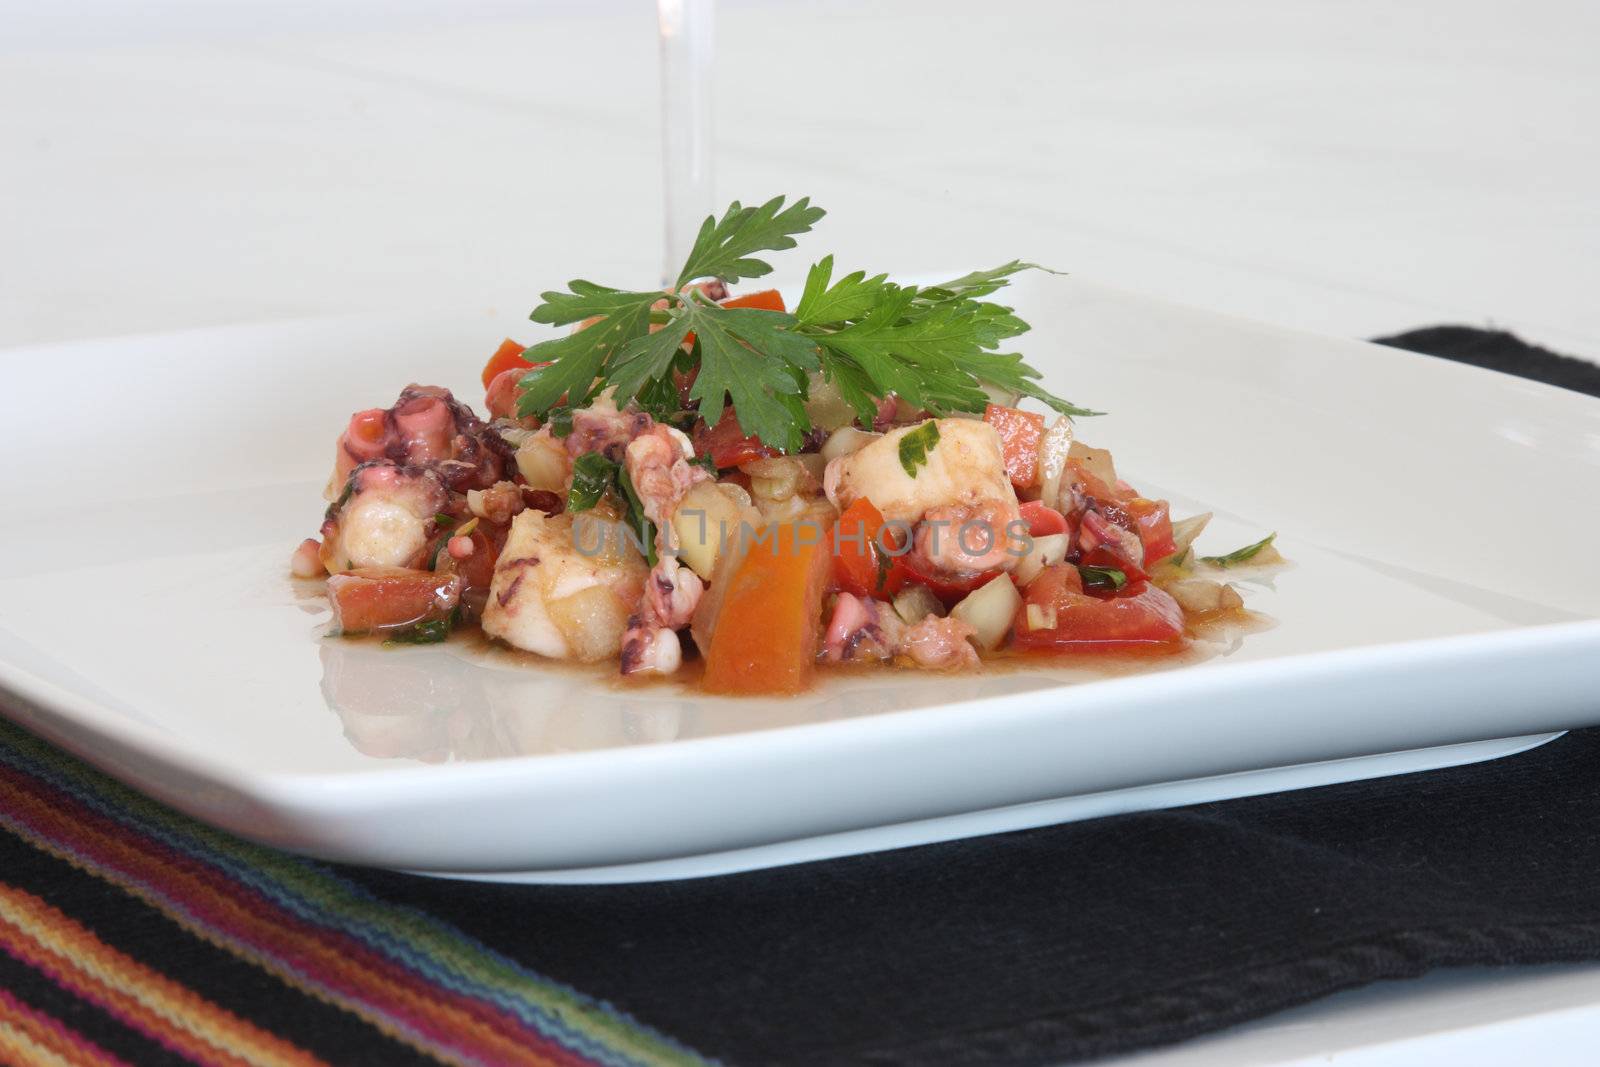 Octopus salad with peppers, onion and tomatos, with olive oil and vinegar.